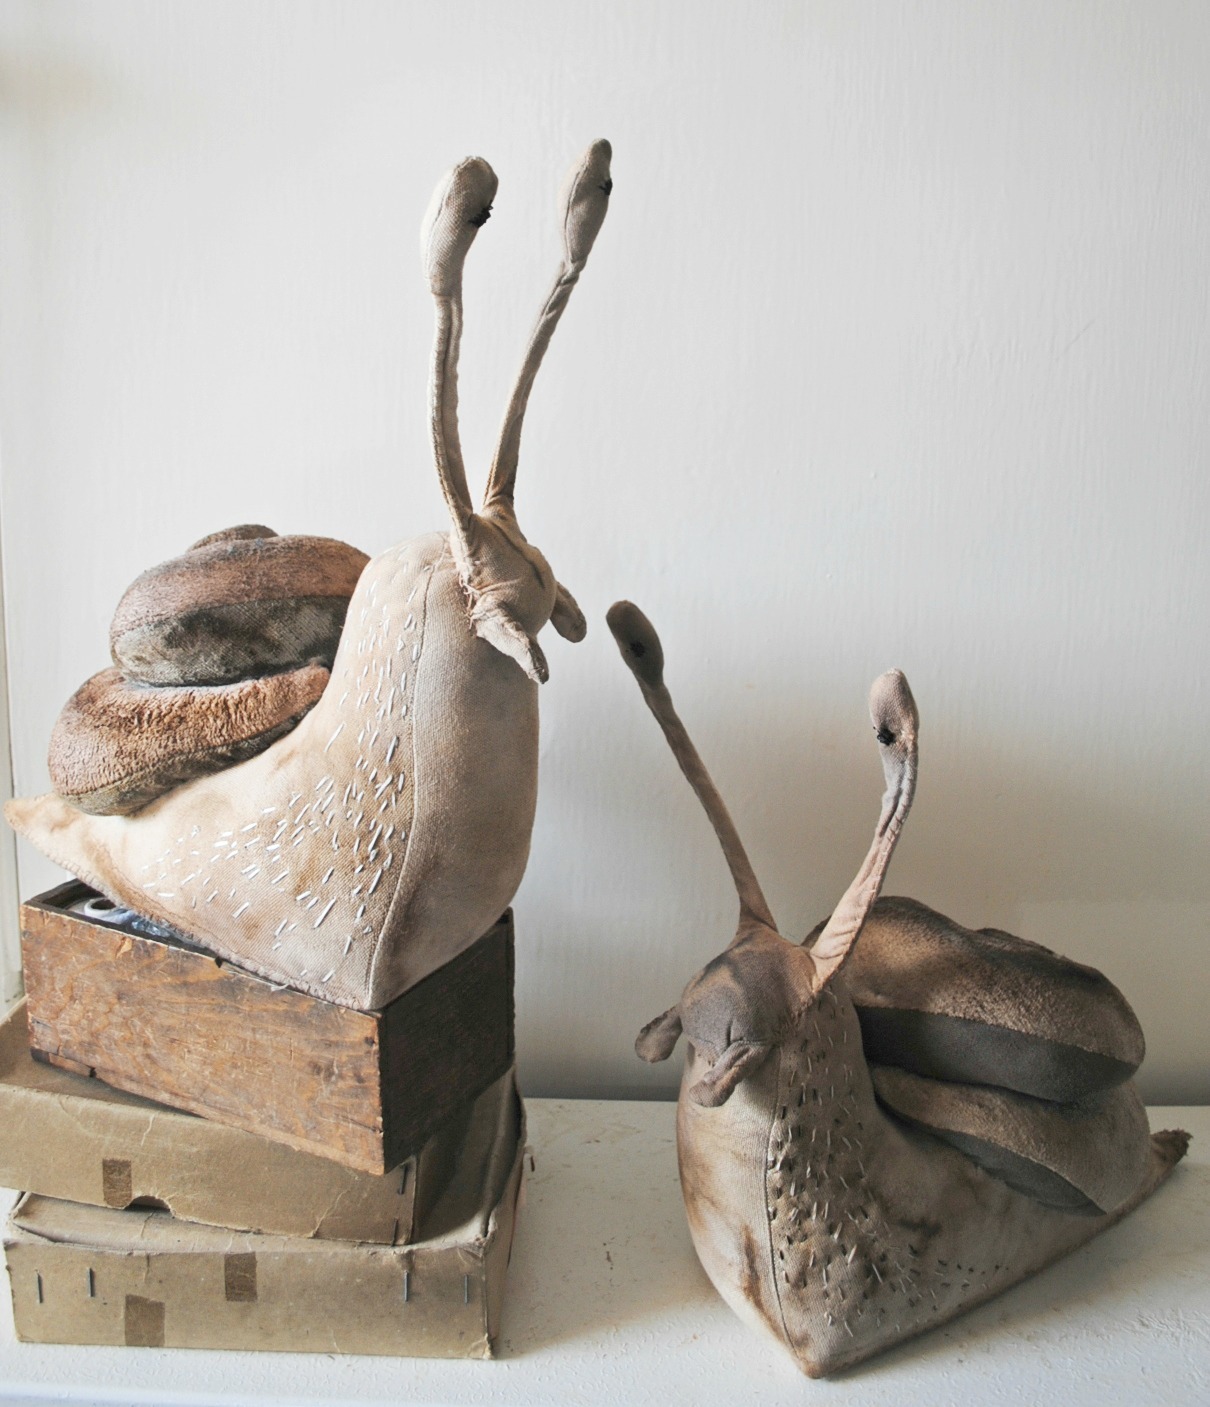 http://ohmisterfinch.tumblr.com/post/33296634921/textile-snail-sculptures-by-mister-finch